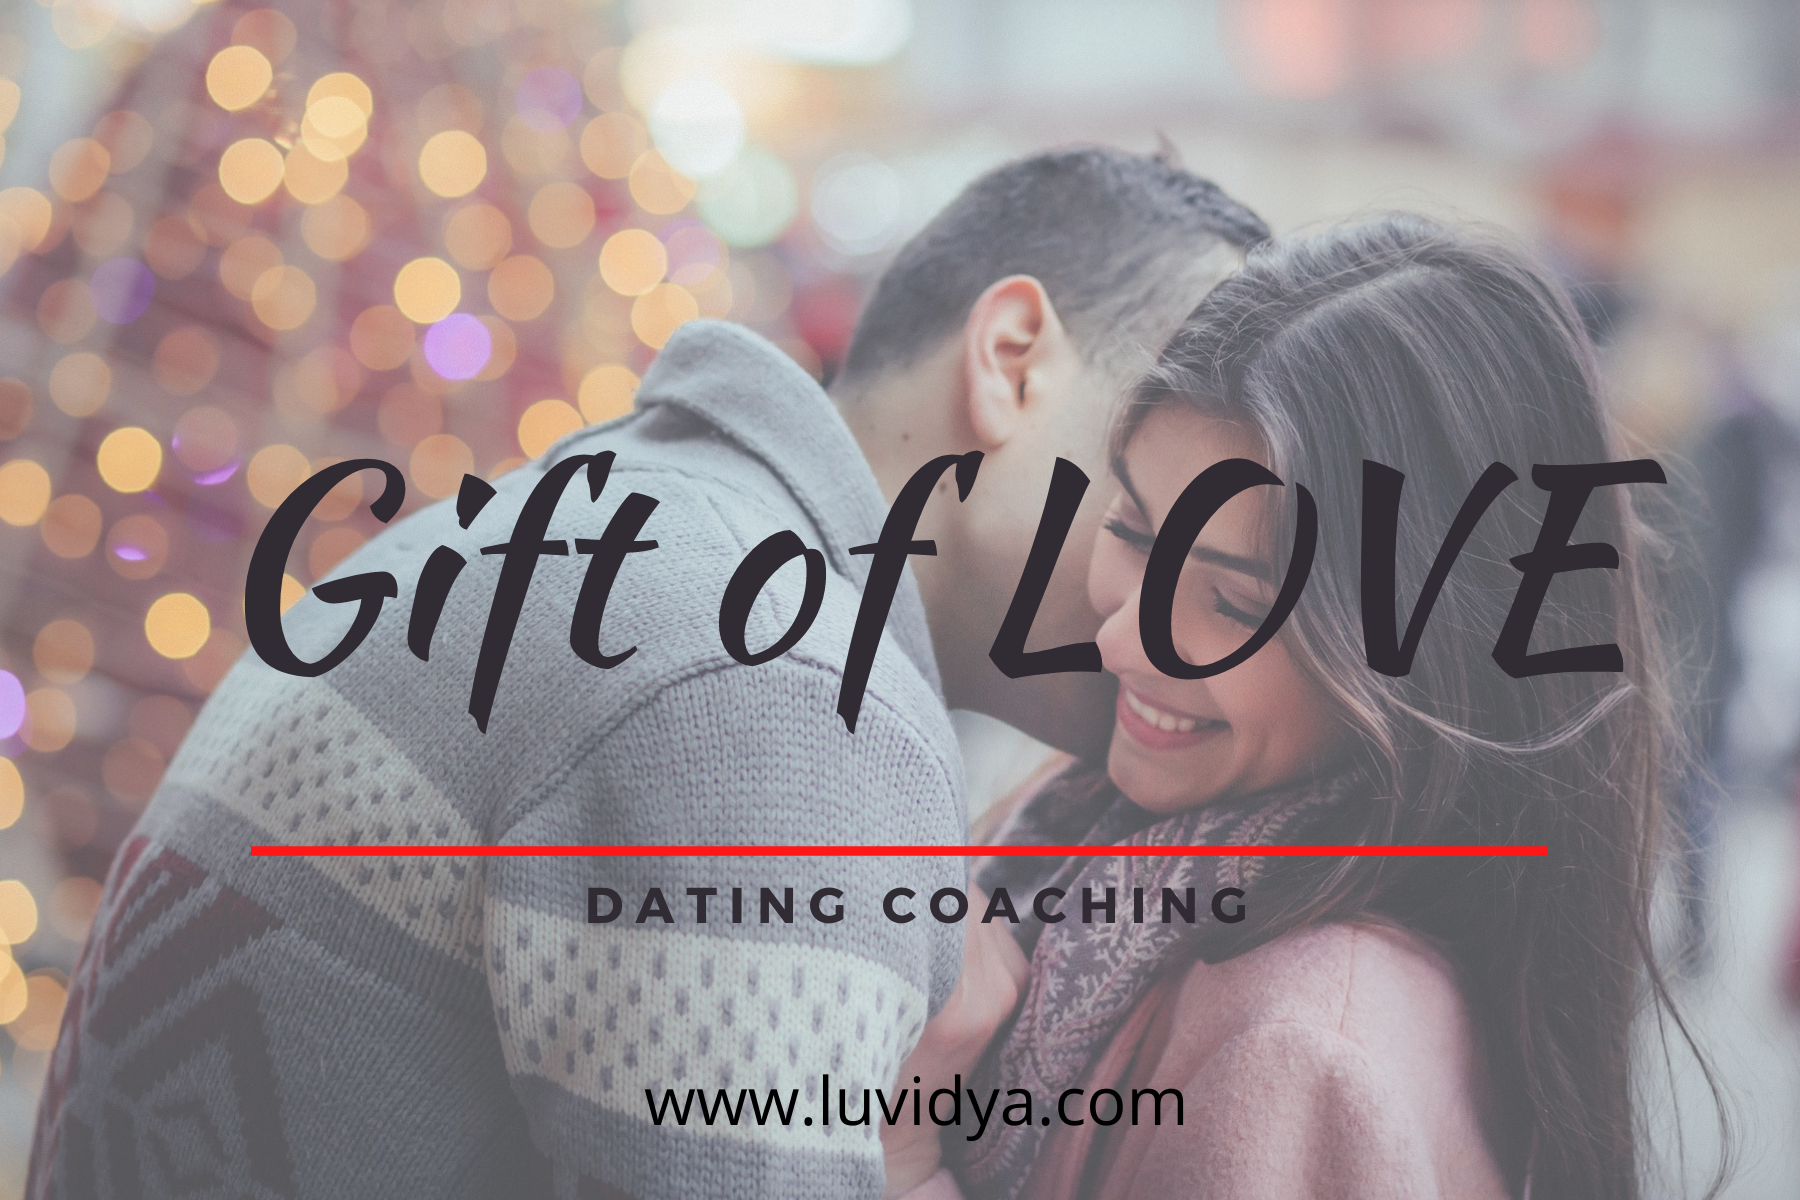 THE GIFT OF LOVE